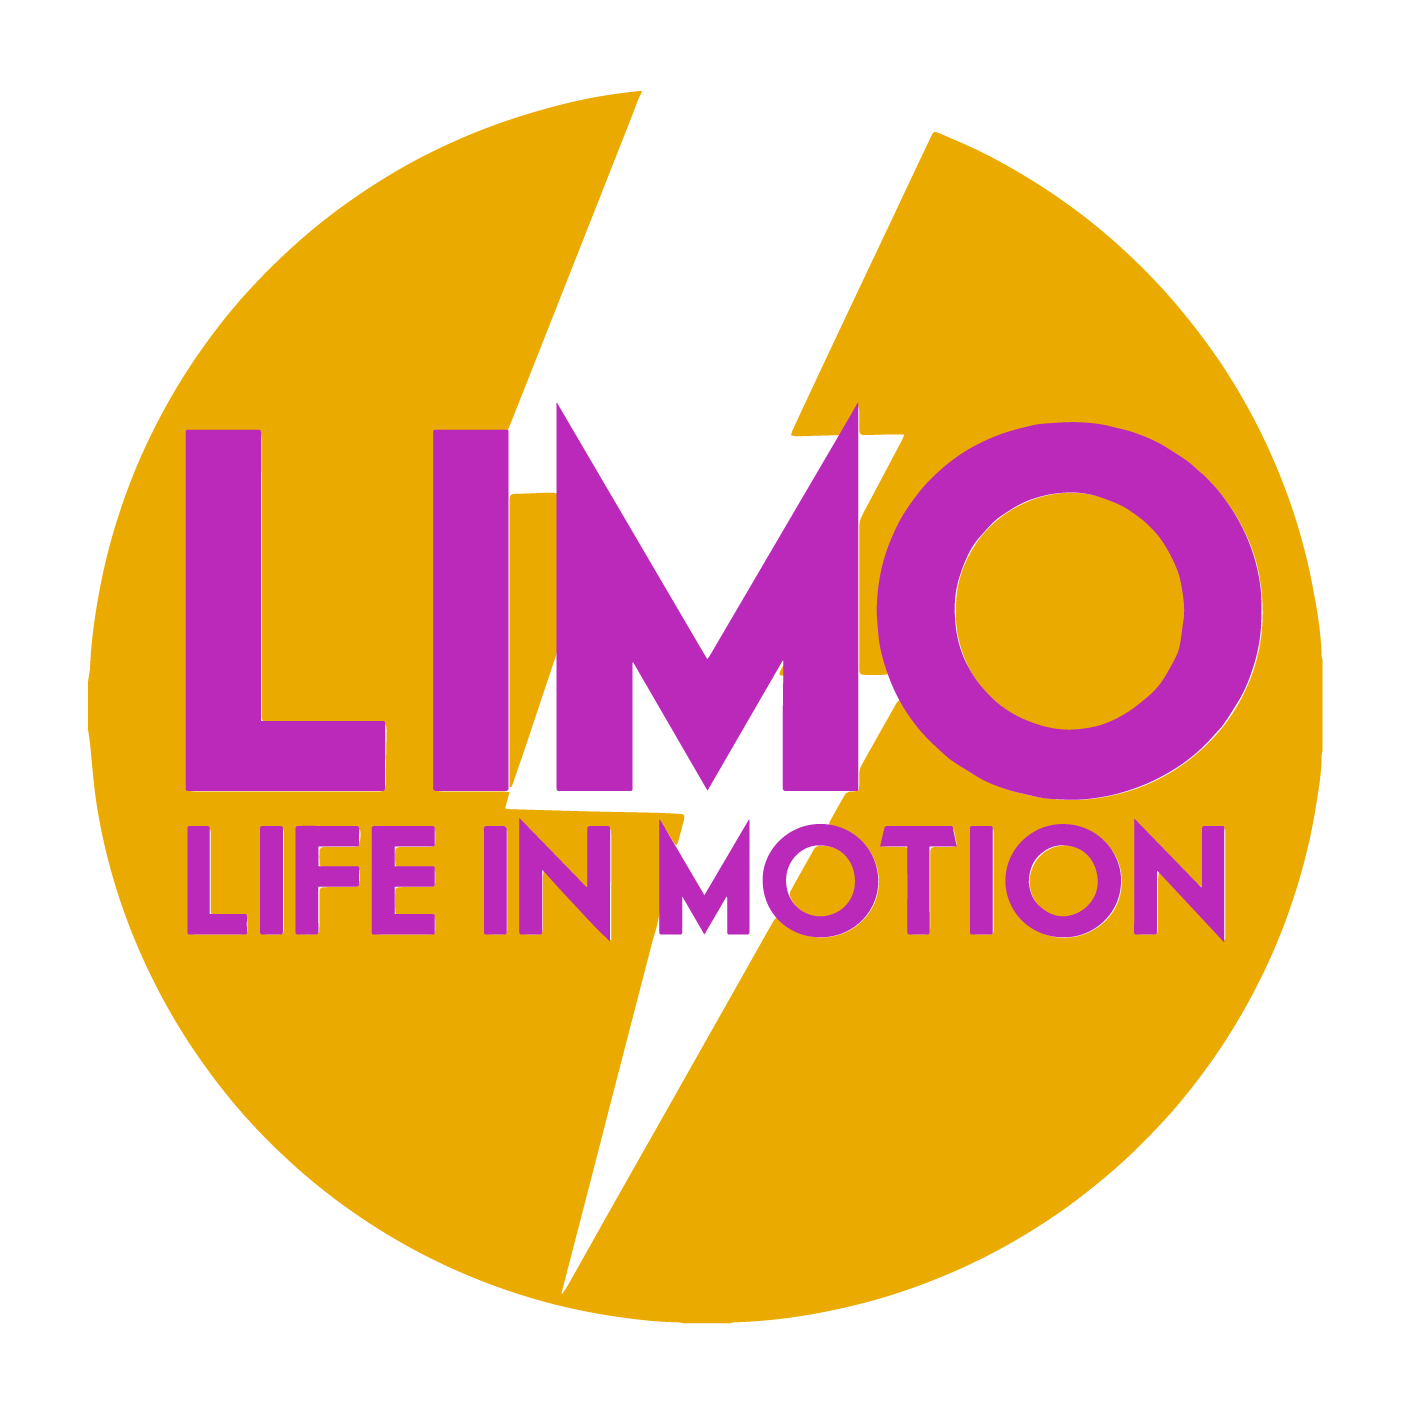 LIMO - LIFE IN MOTION